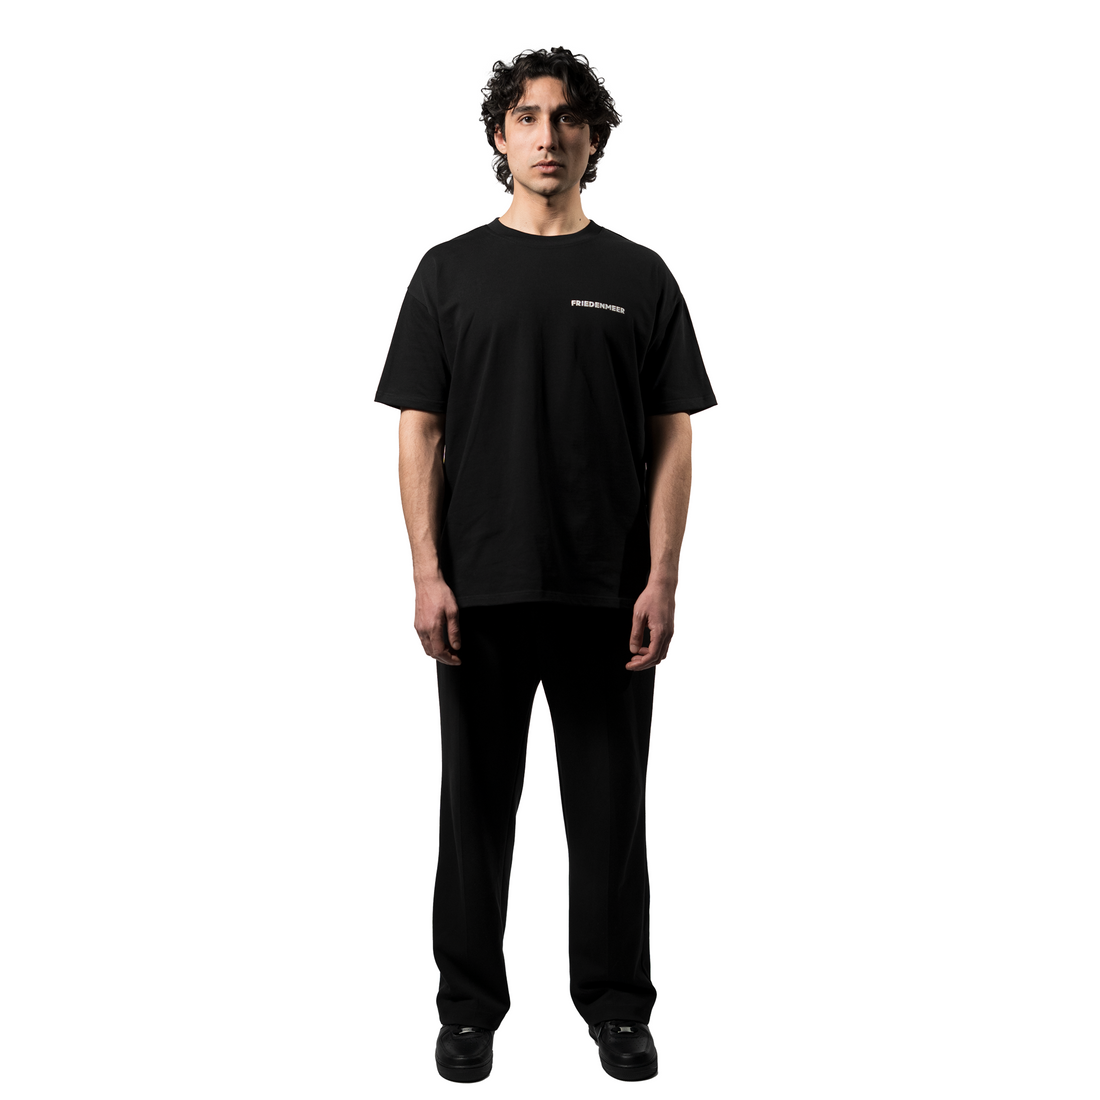 A model showcases an elegant oversized black T-shirt with the white brand name FRIEDENMEER across the chest, paired with matching black trousers and shoes, highlighting the brand's sleek elegance luxury.